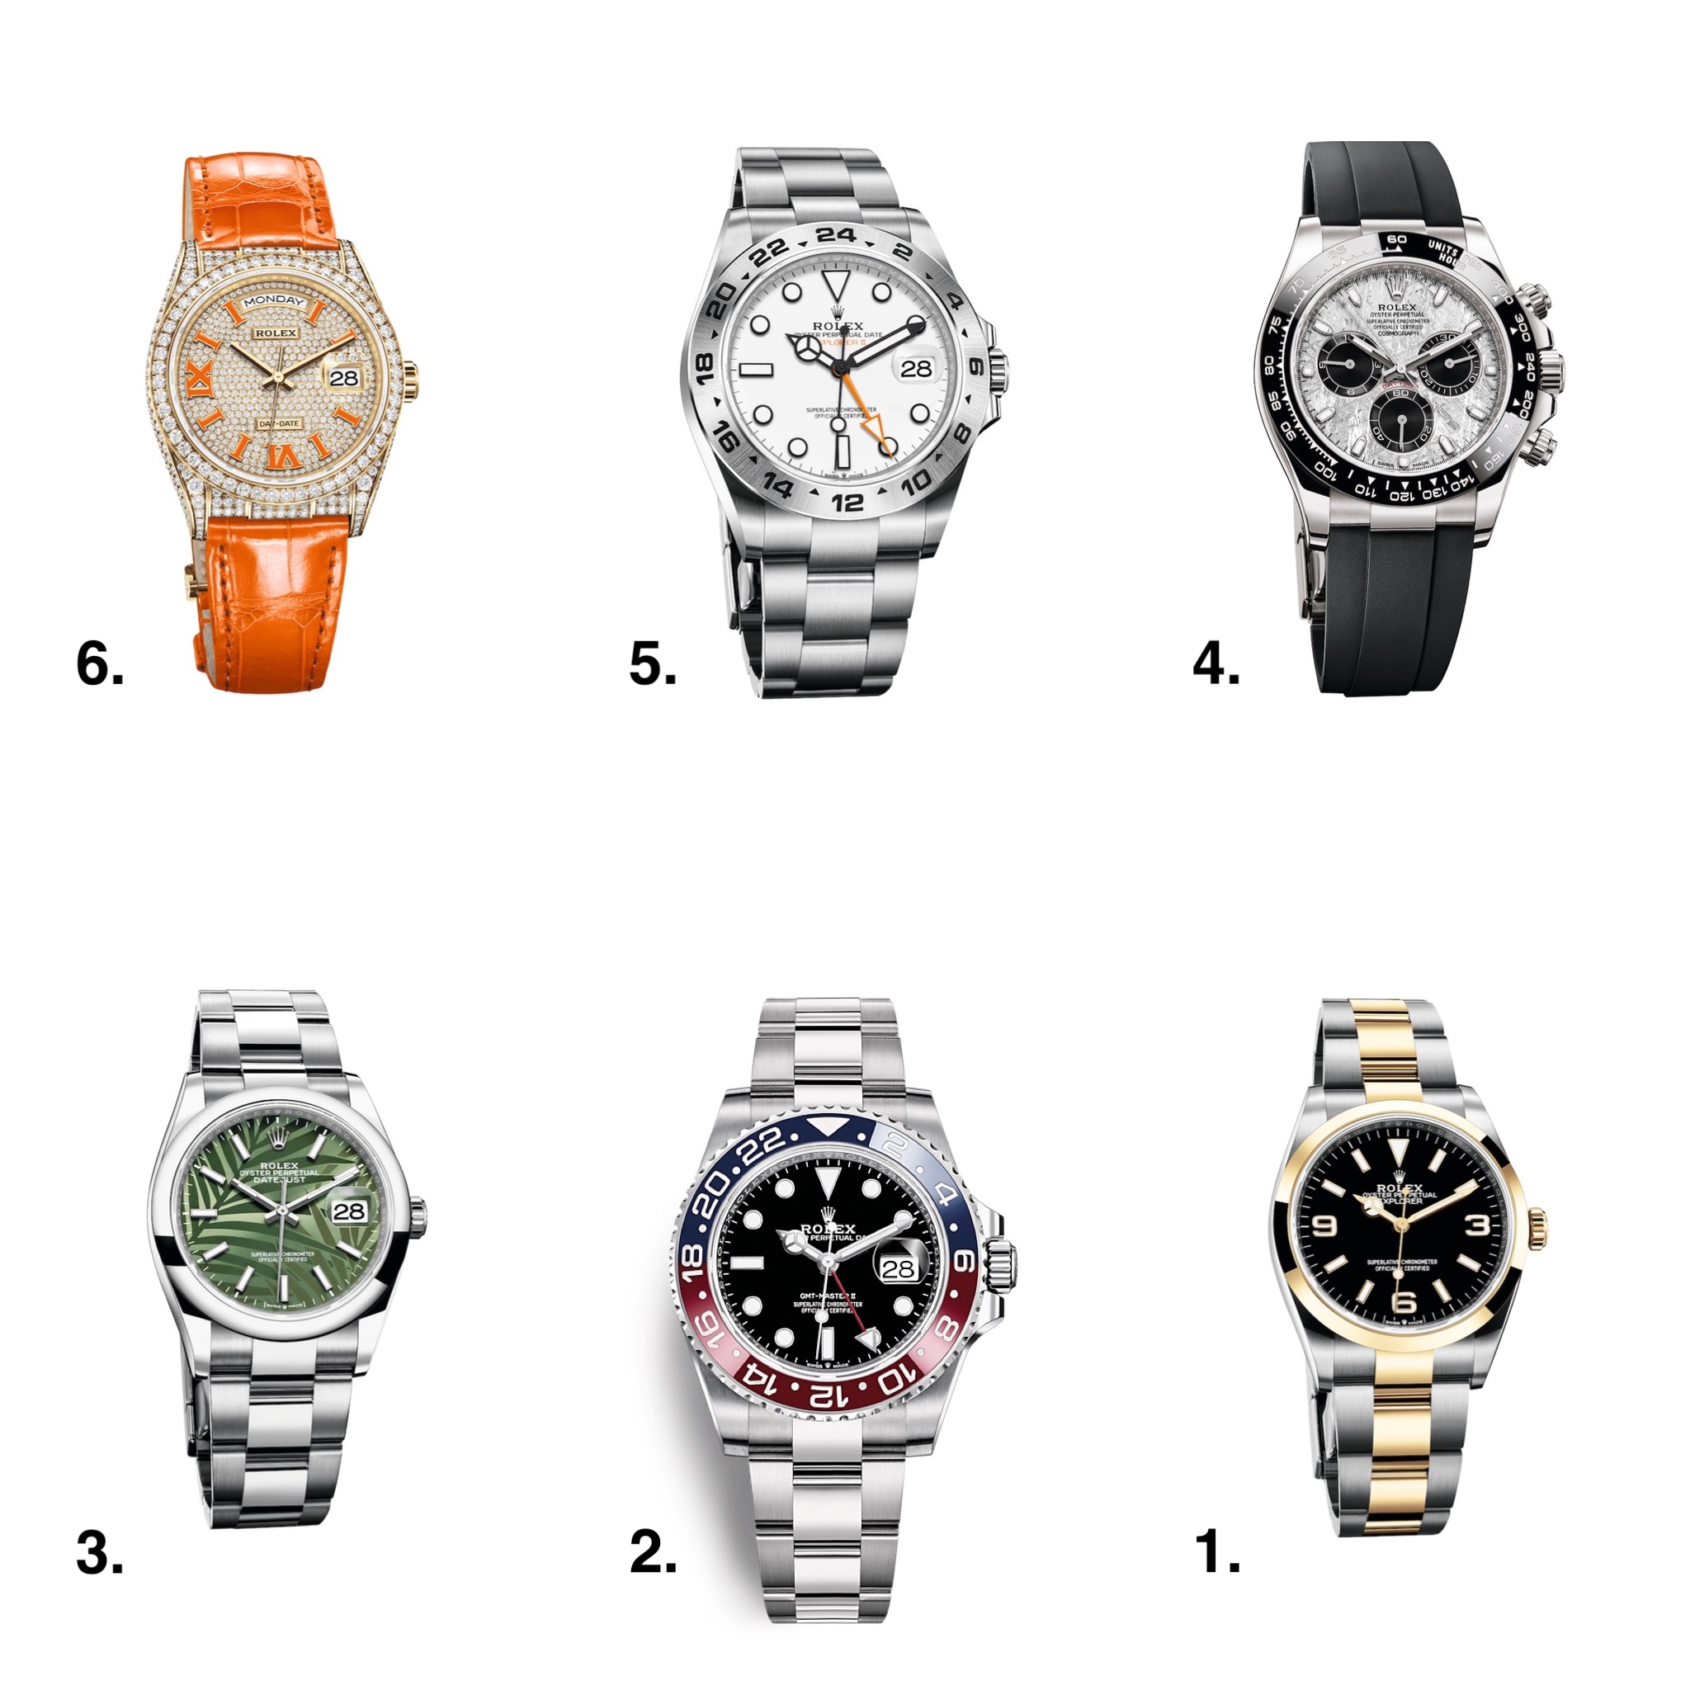 2021 Rolex Collection ranked from least to most surprising